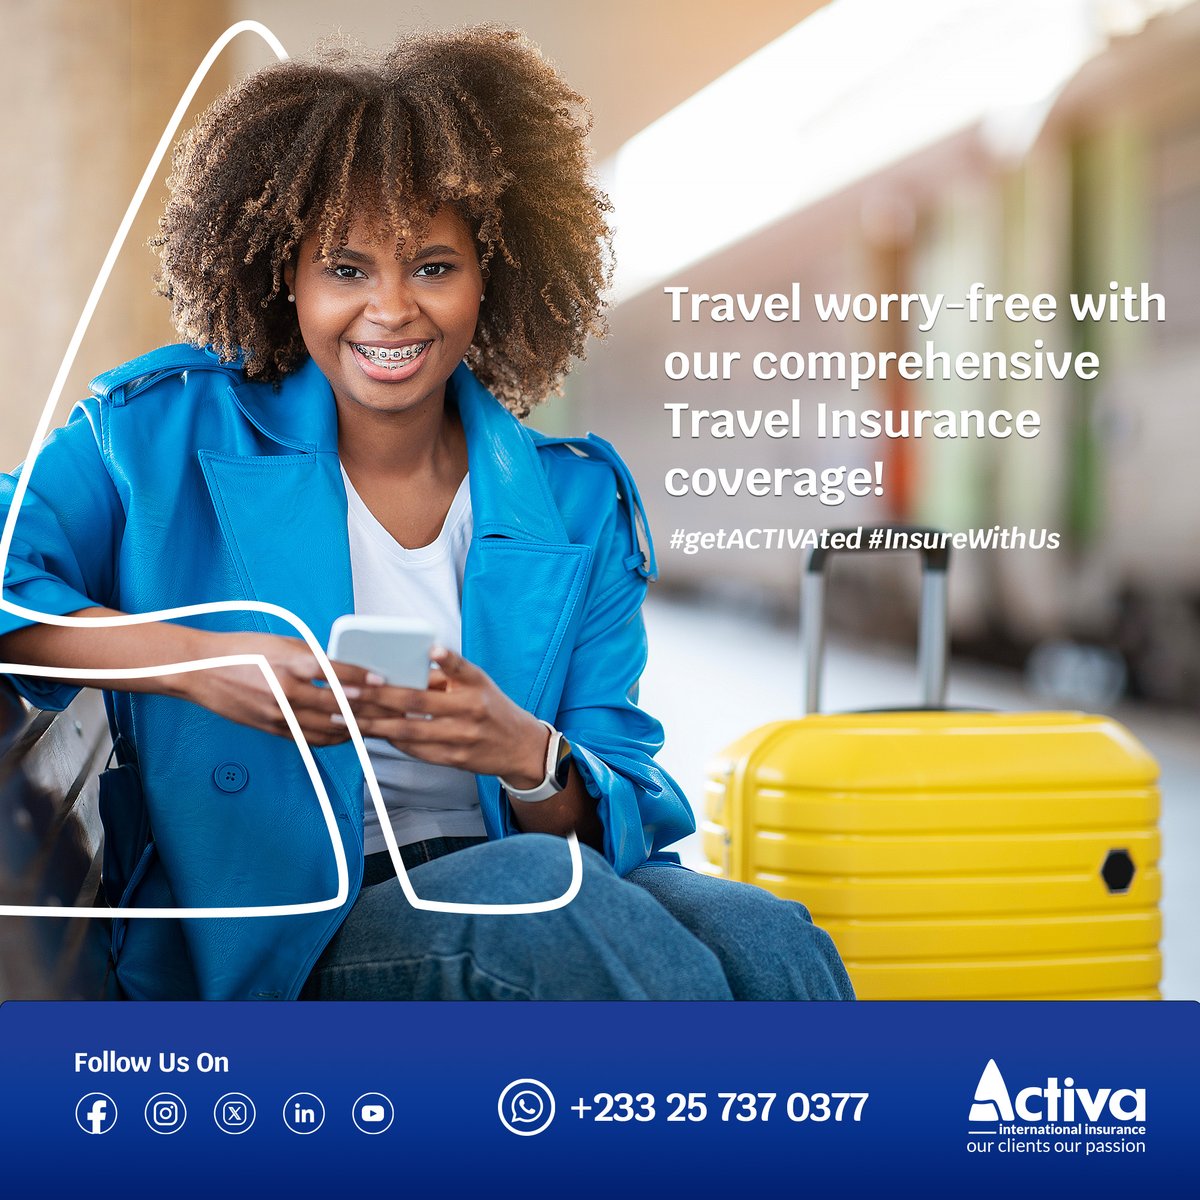 From trip cancellations to medical emergencies, we've got you covered every step of the way.

#getACTIVAted #InsureWithUs #TravelInsurance #SmartInsurance #Insurance #ourclientsourpassion